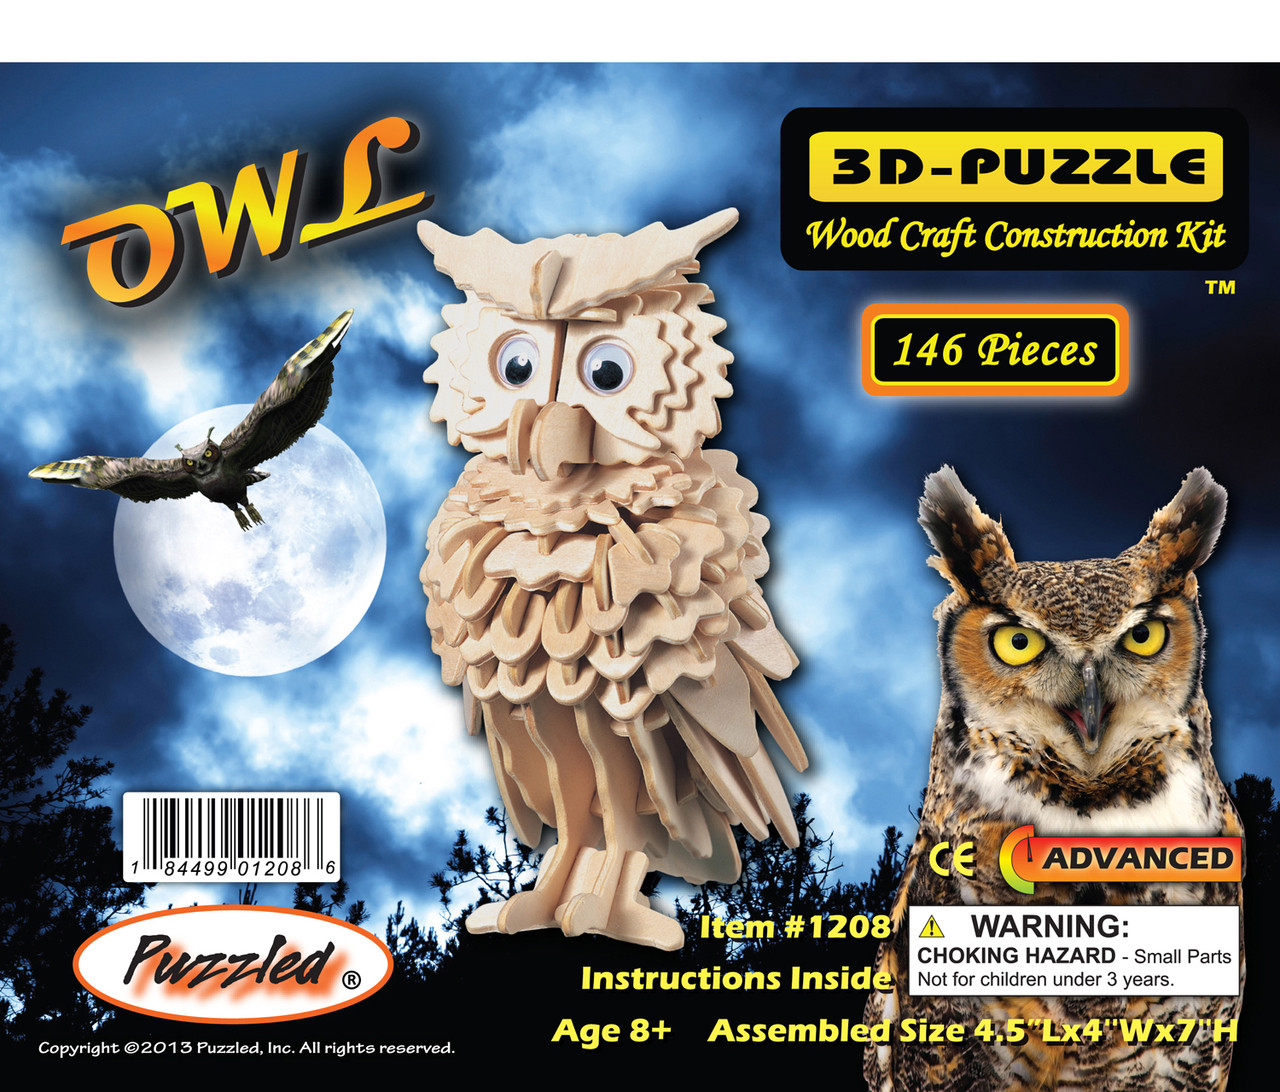 3D Puzzles, Products